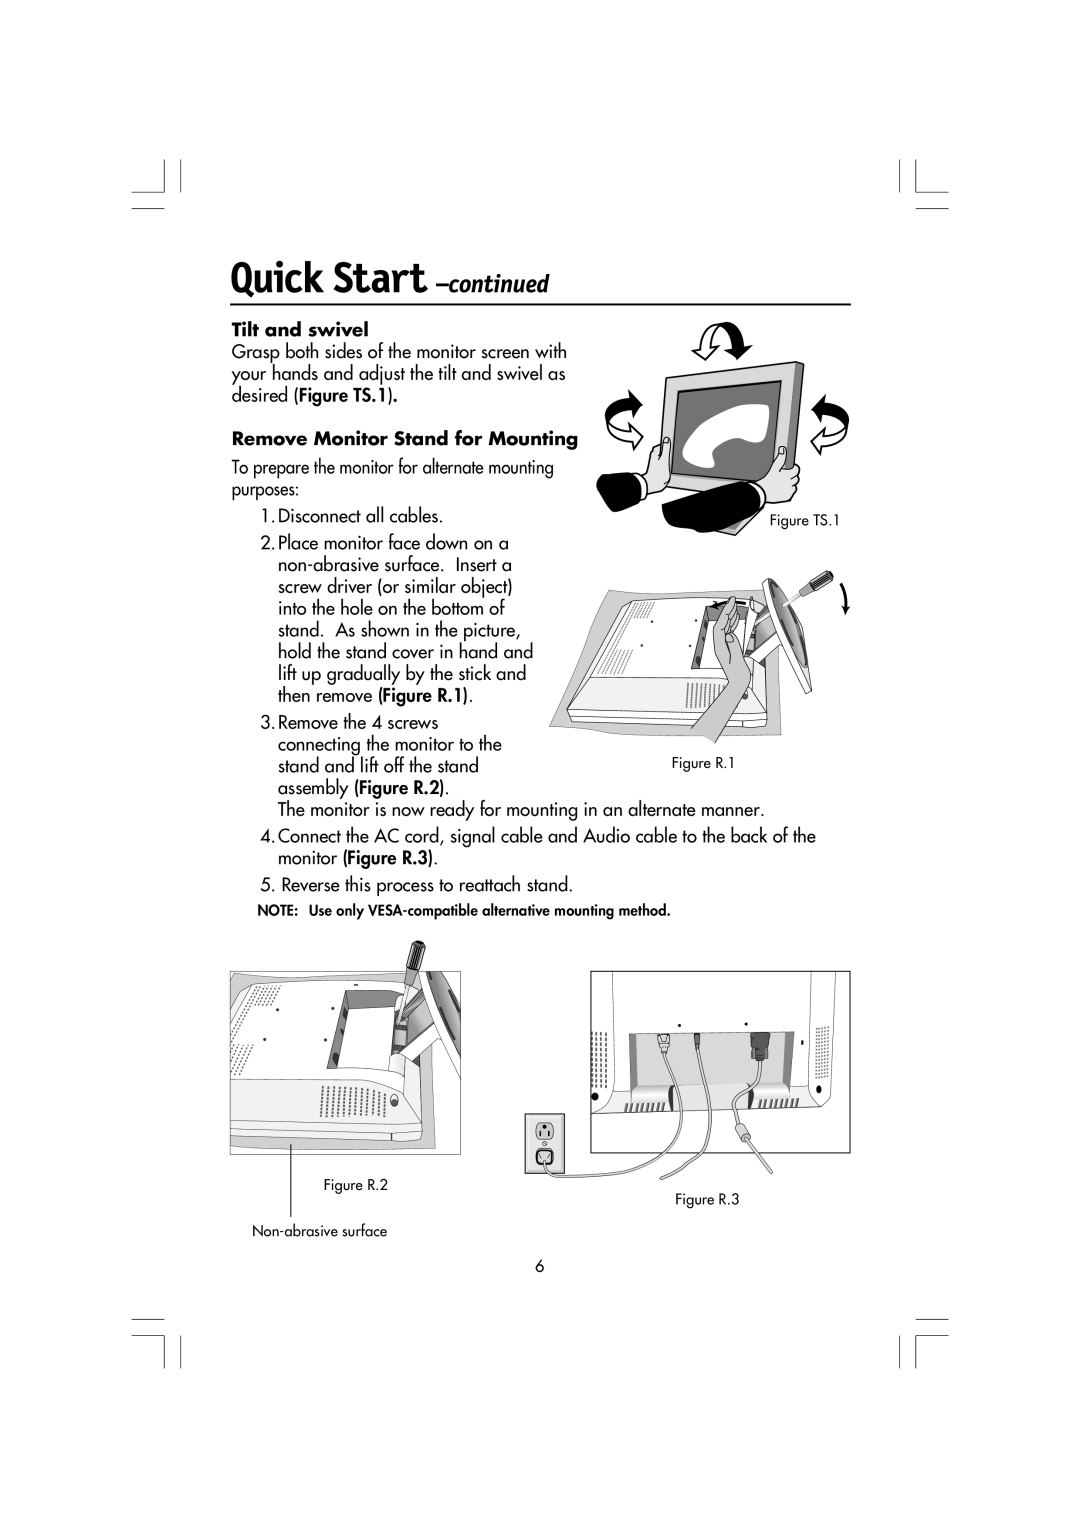 Mitsubishi Electronics LCD1720M manual Quick Start -continued, Tilt and swivel, Remove Monitor Stand for Mounting 